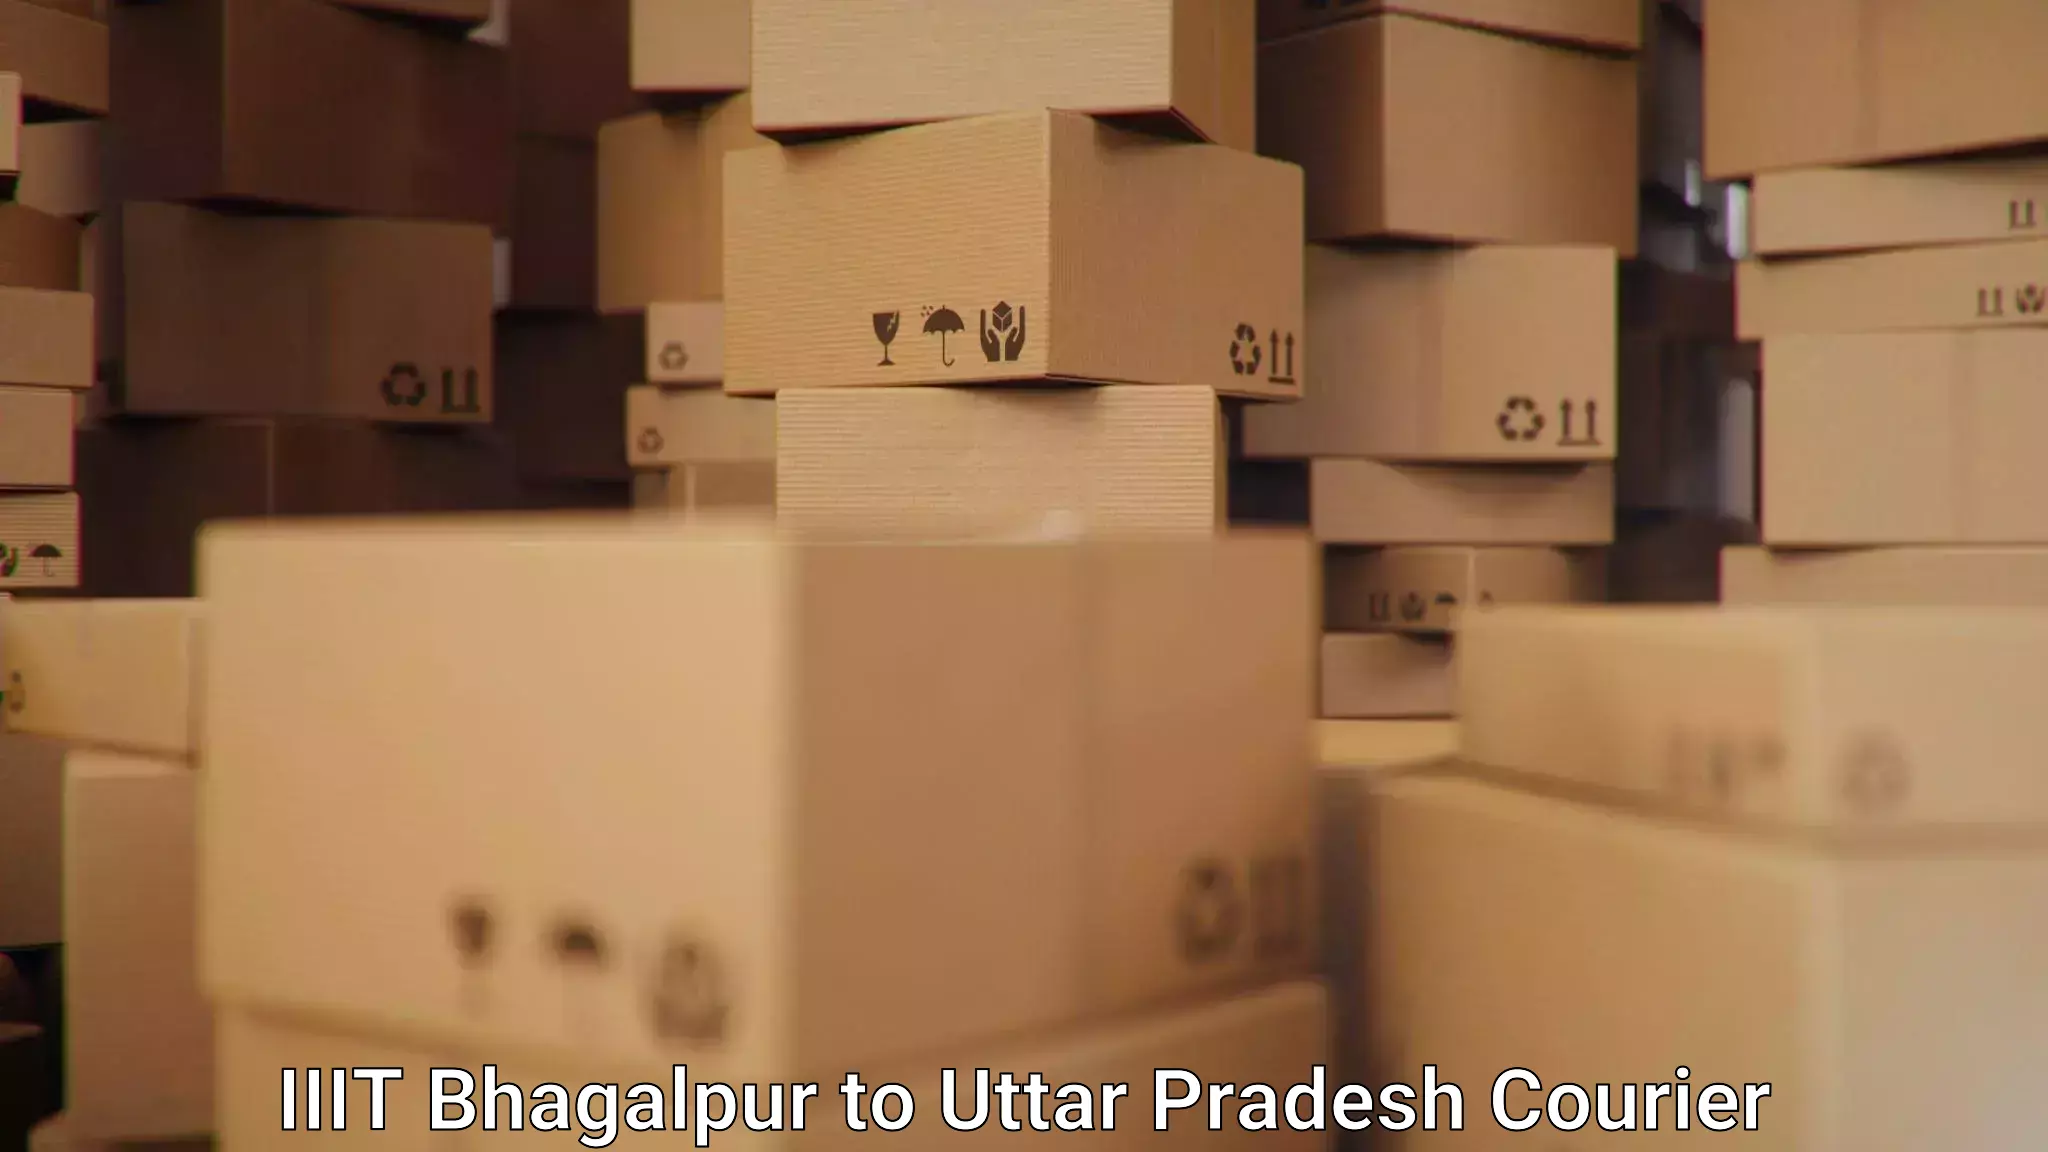 24-hour courier services IIIT Bhagalpur to Deoband